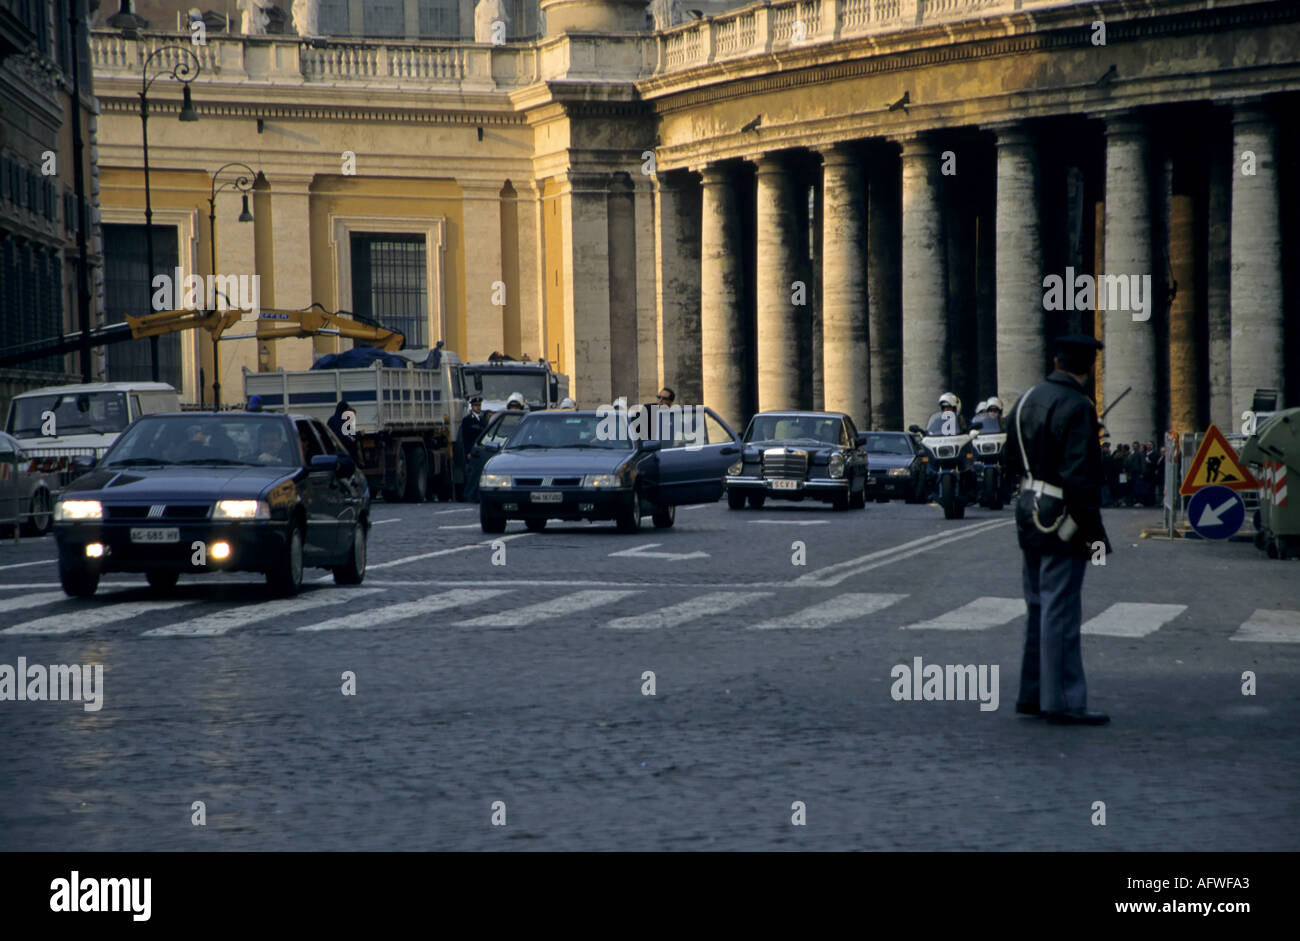 Vatican Pope Car Scv1 Leaving St Peter Square With Giovanni Paolo Ii Stock Photo